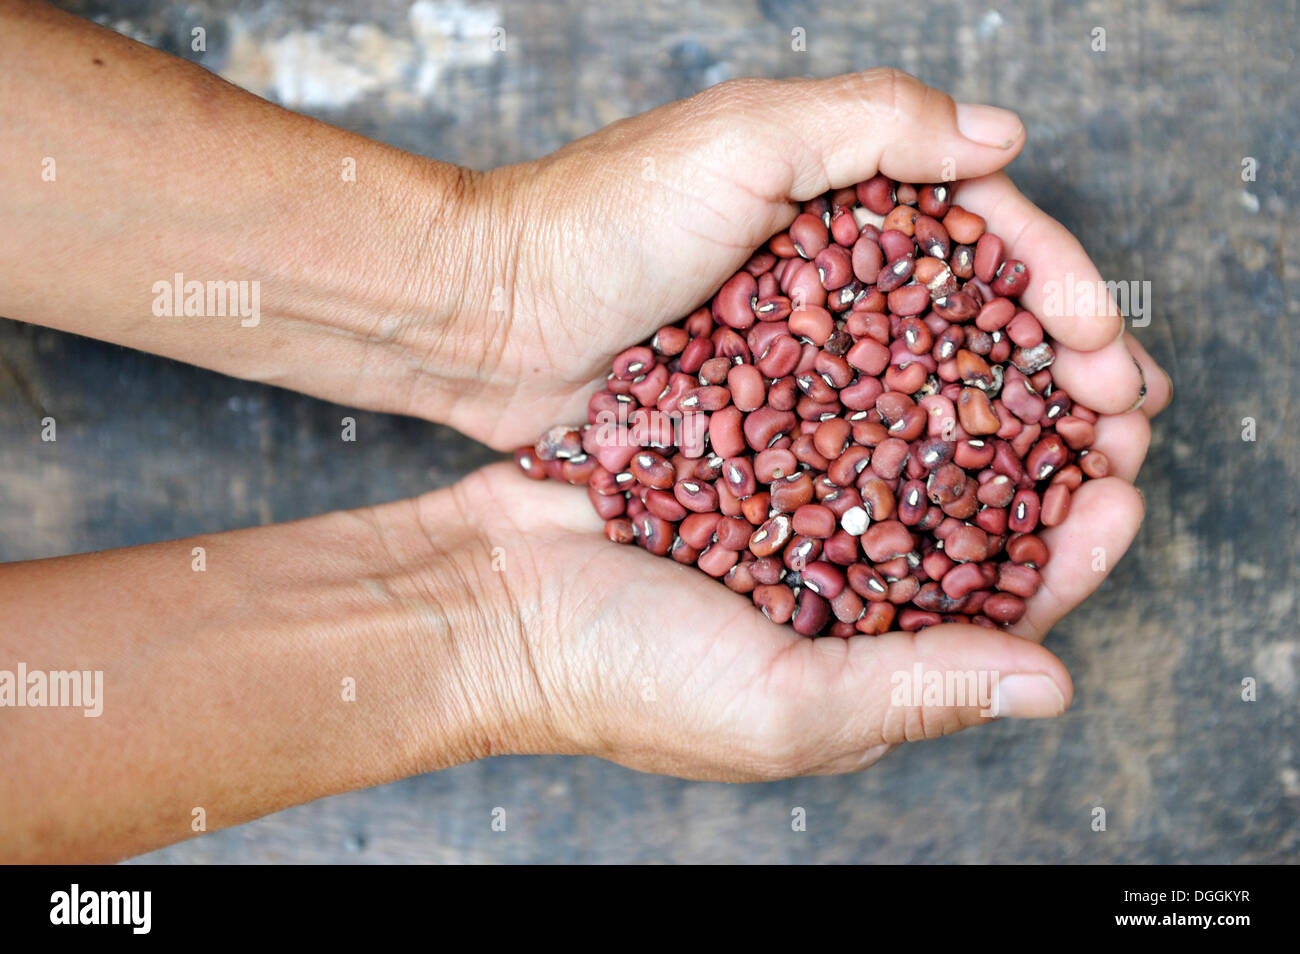 Hands full of beans, Campito, Caaguazú Department, Paraguay Stock Photo